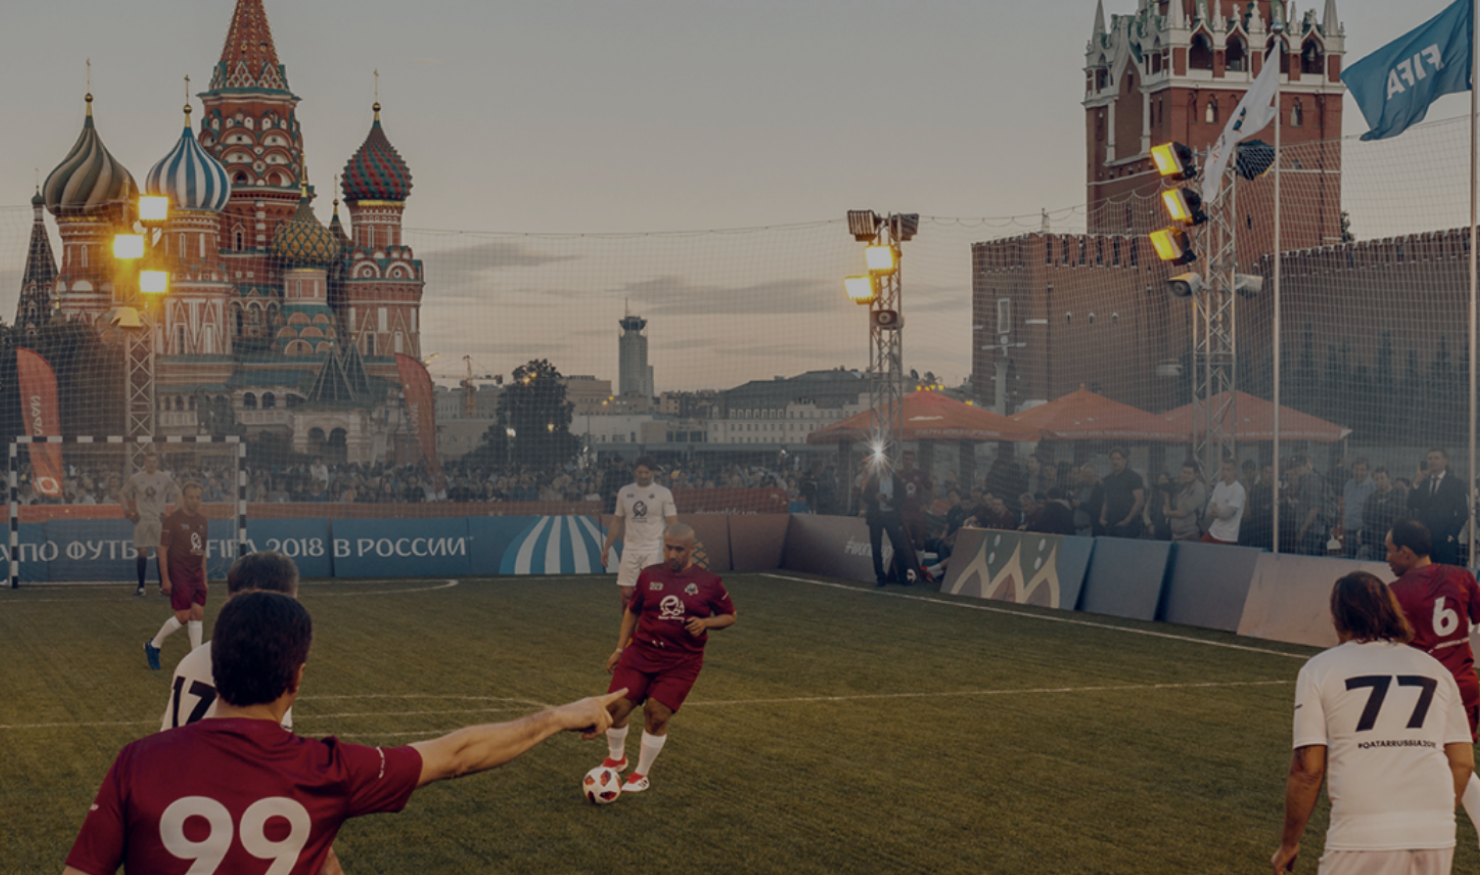 A football pitch with two opposing teams mid-match, with Moscow's famous Red Square in the background.